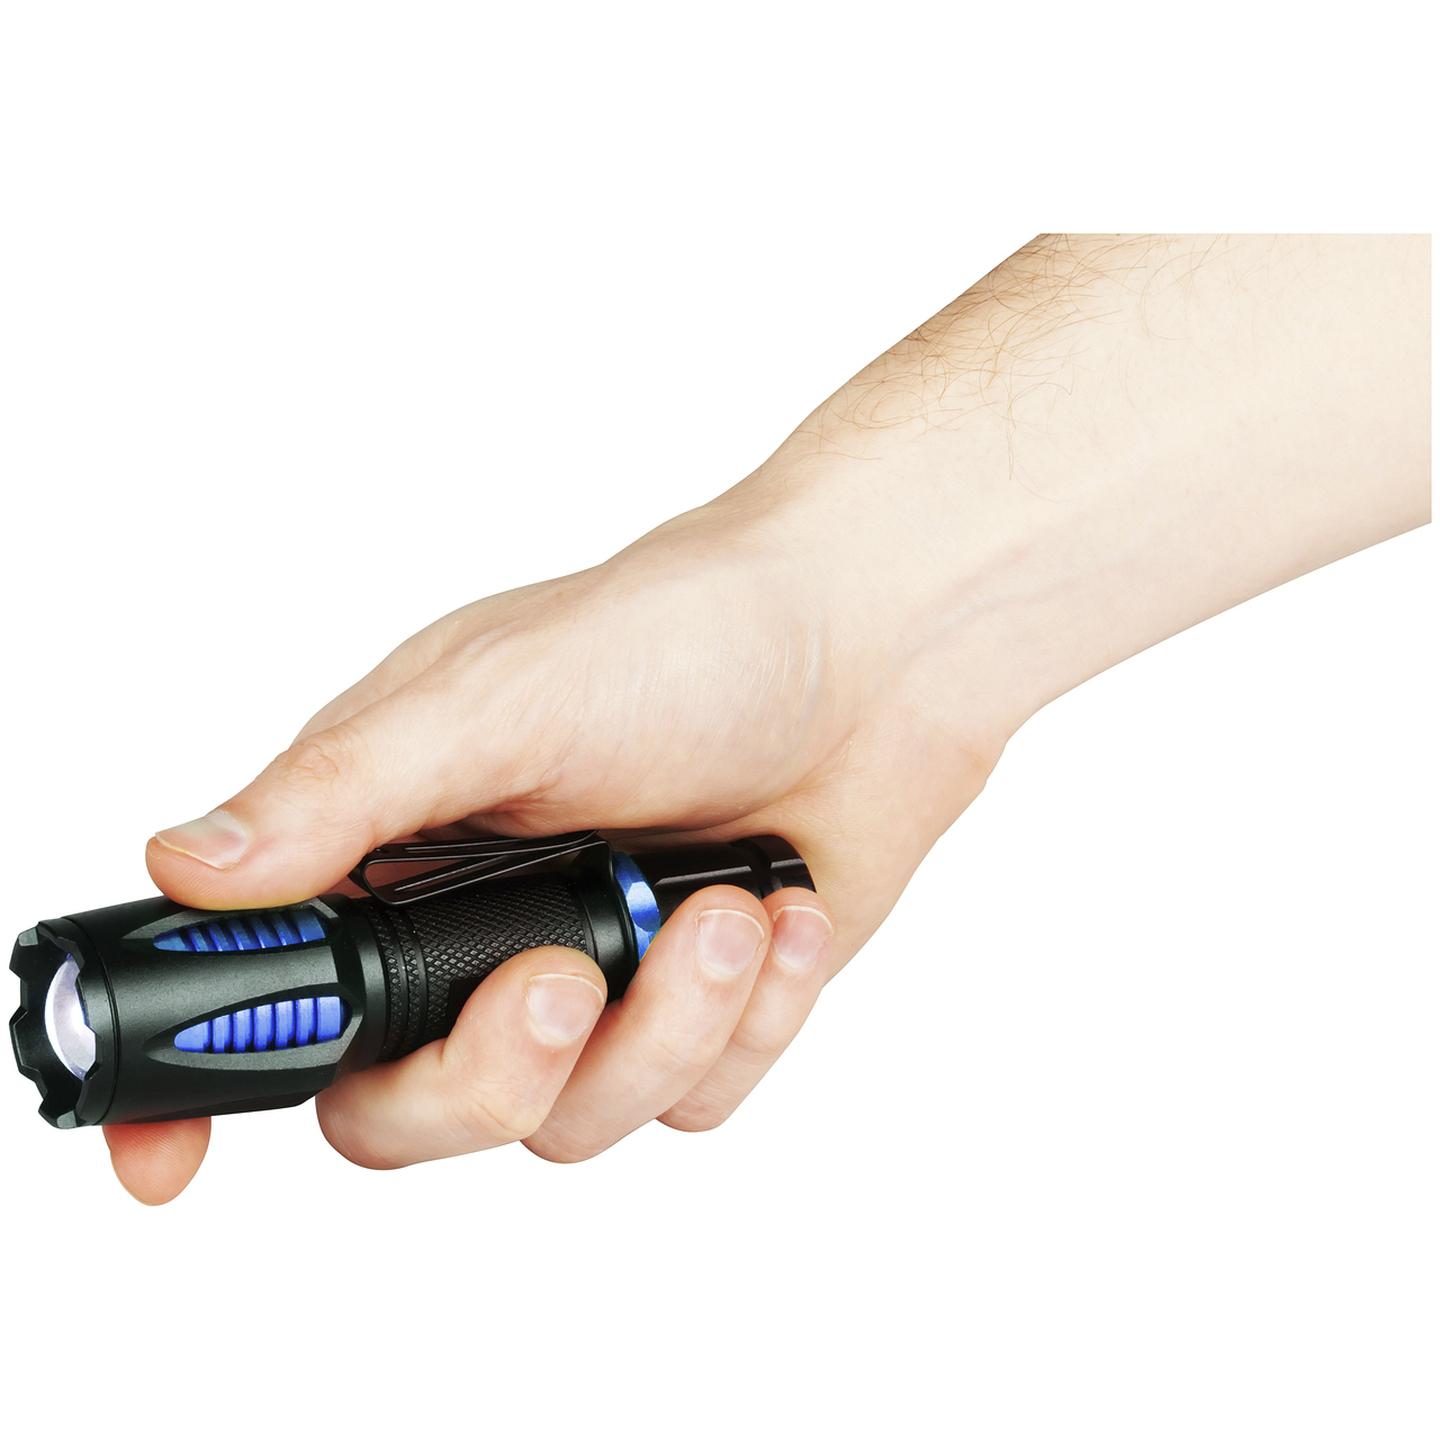 Torch LED USB Rechargeable